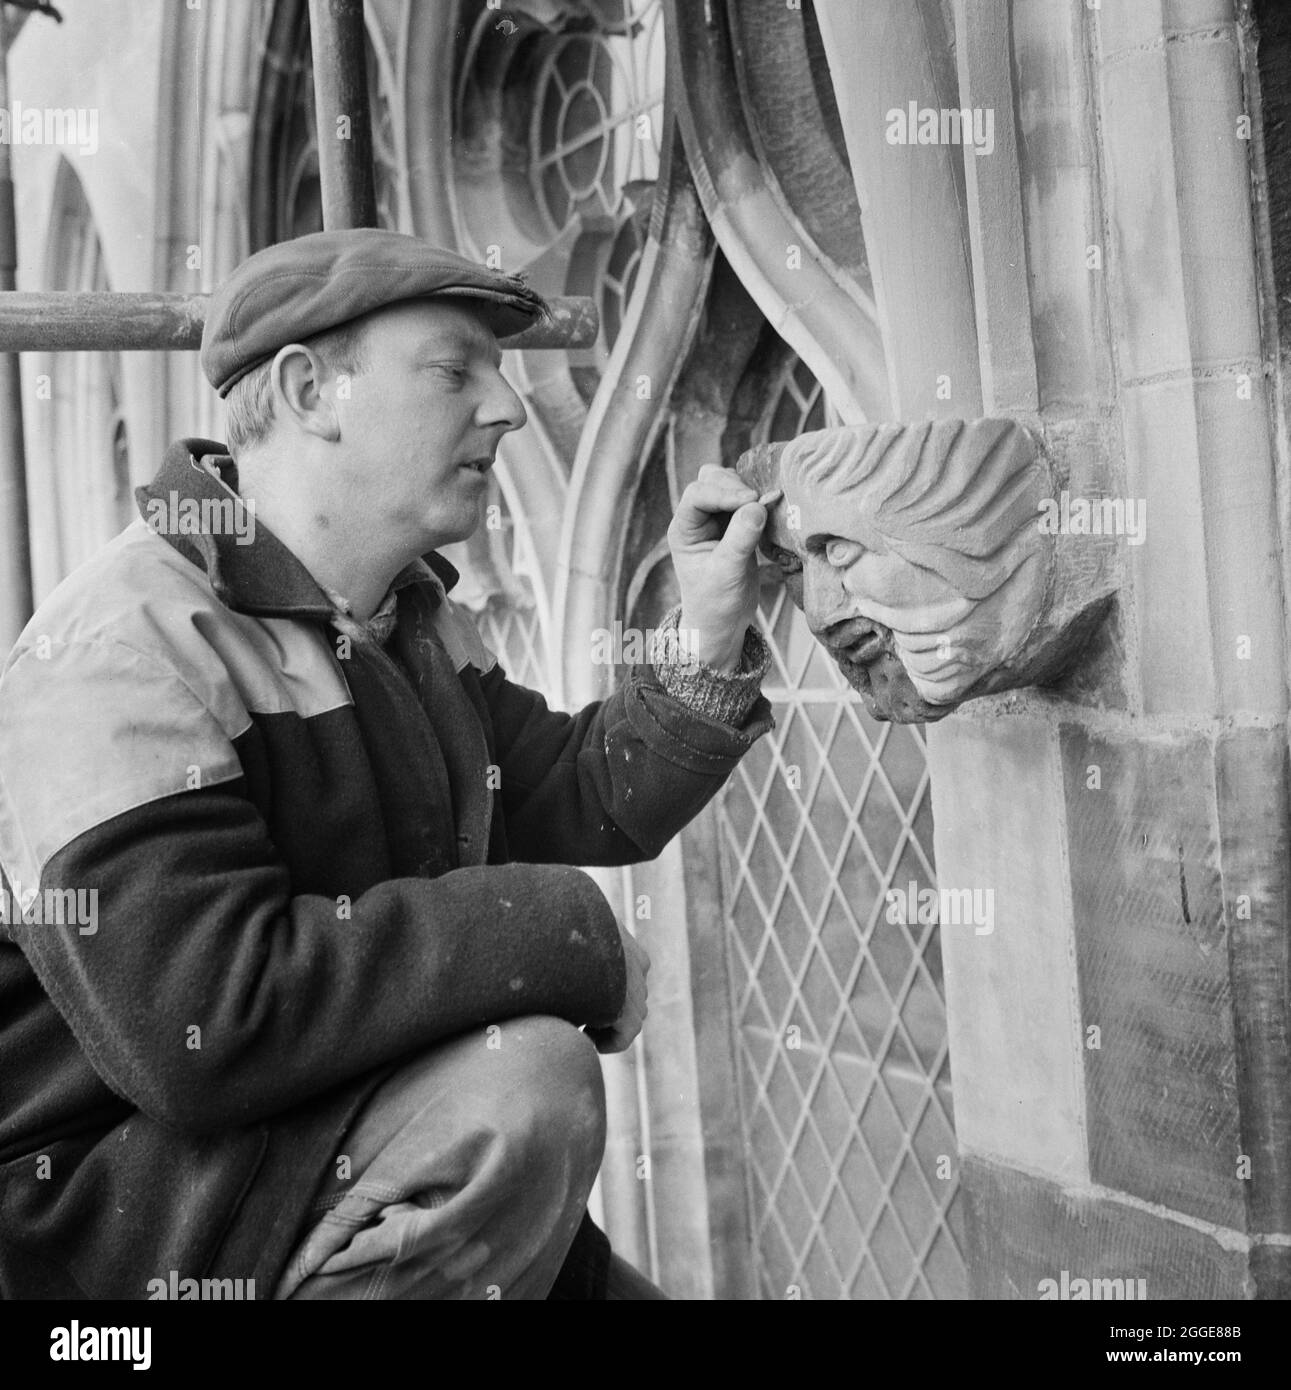 Foreman stonemason, Ted Drinkwater, working at Carlisle Cathedral checking  a stone head on the north face of the cathedral. Half its face had been  replaced using SBD Certite as the adhesive. This